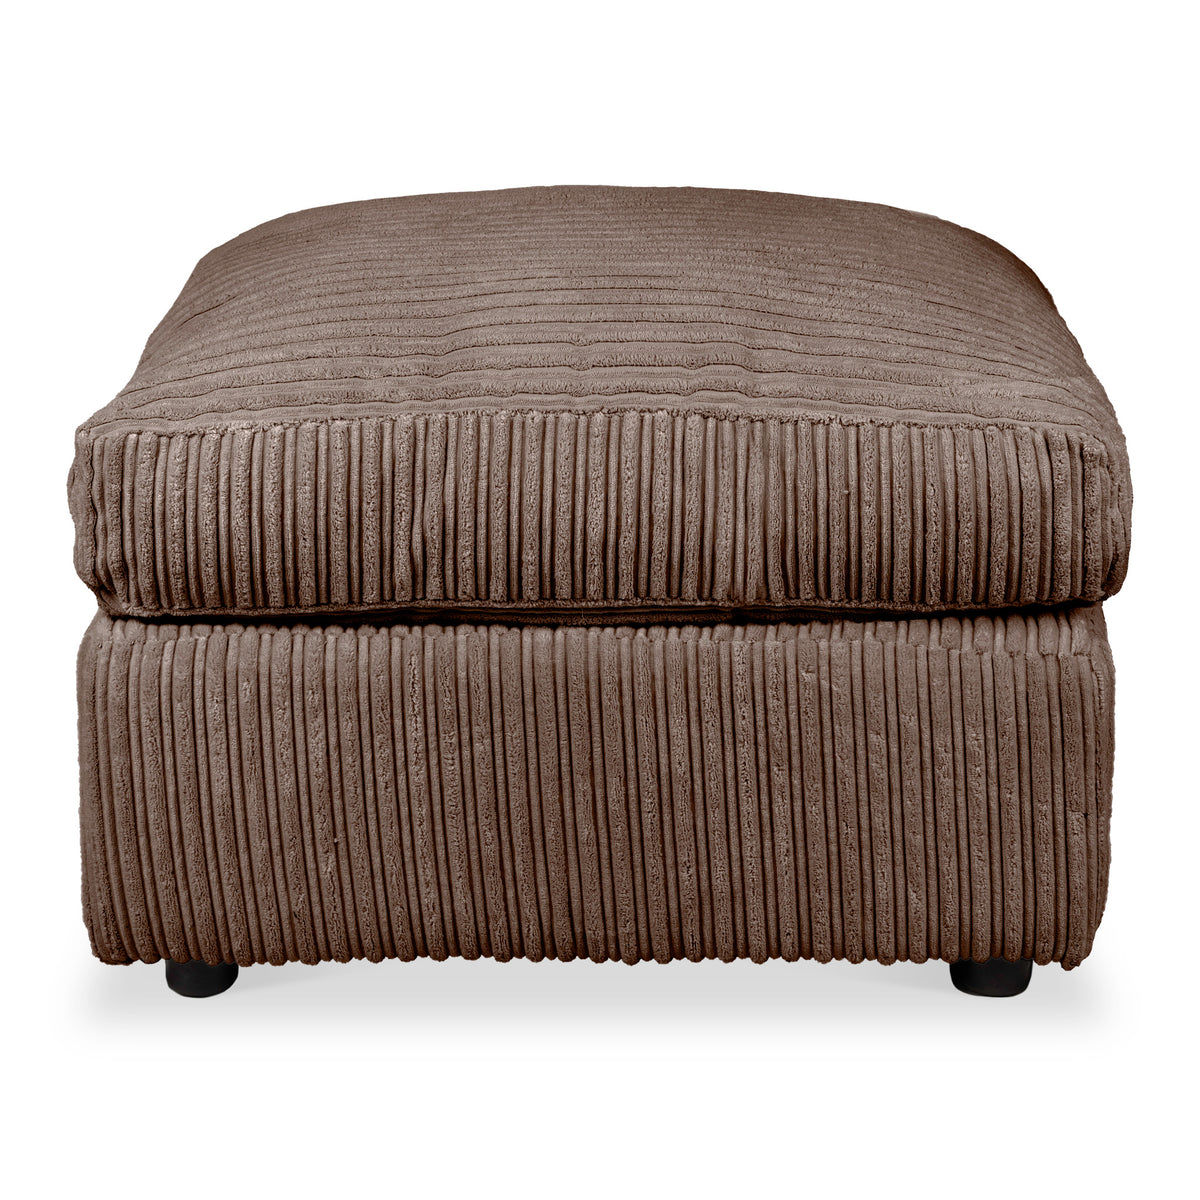 Bletchley Chocolate Jumbo Cord Footrest from Roseland Furniture